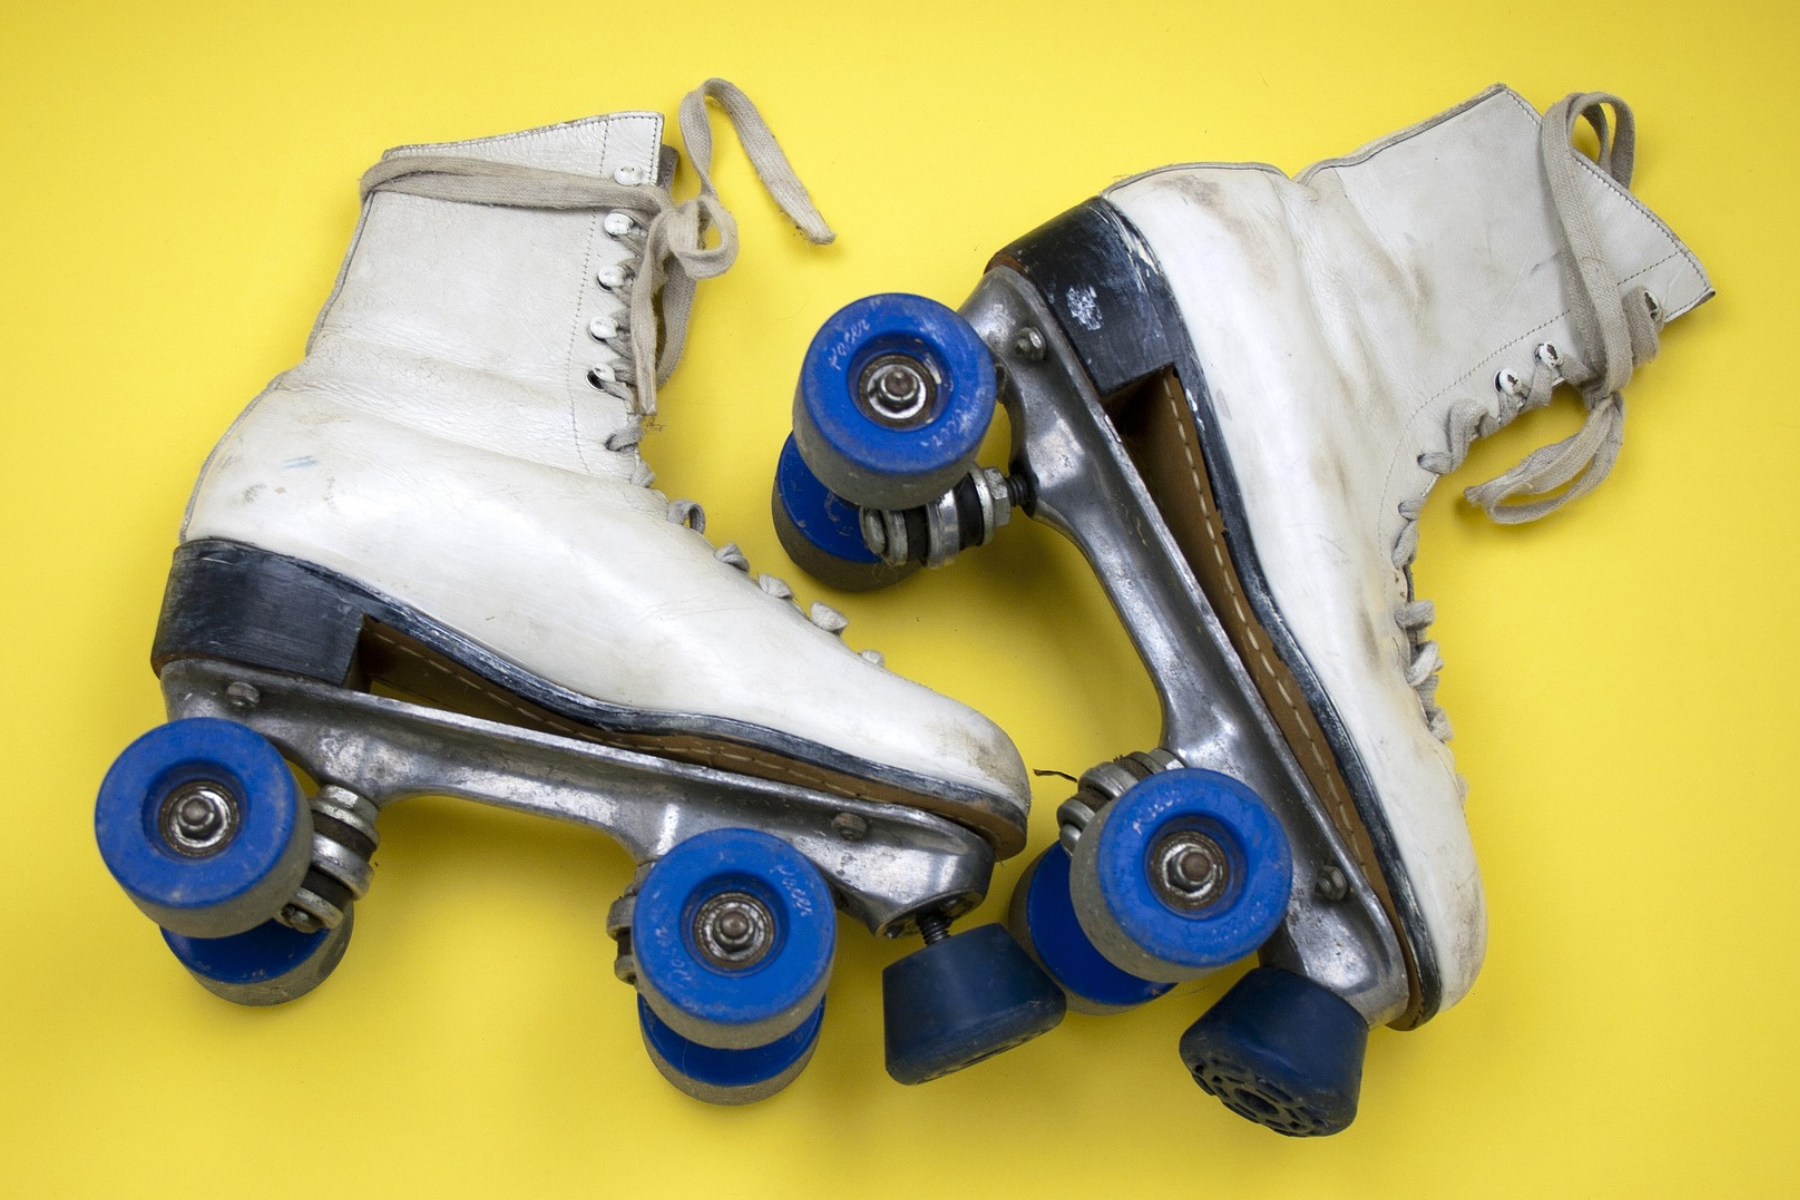 Skate Maintenance and Care: Keeping Your Skates in Top Shape